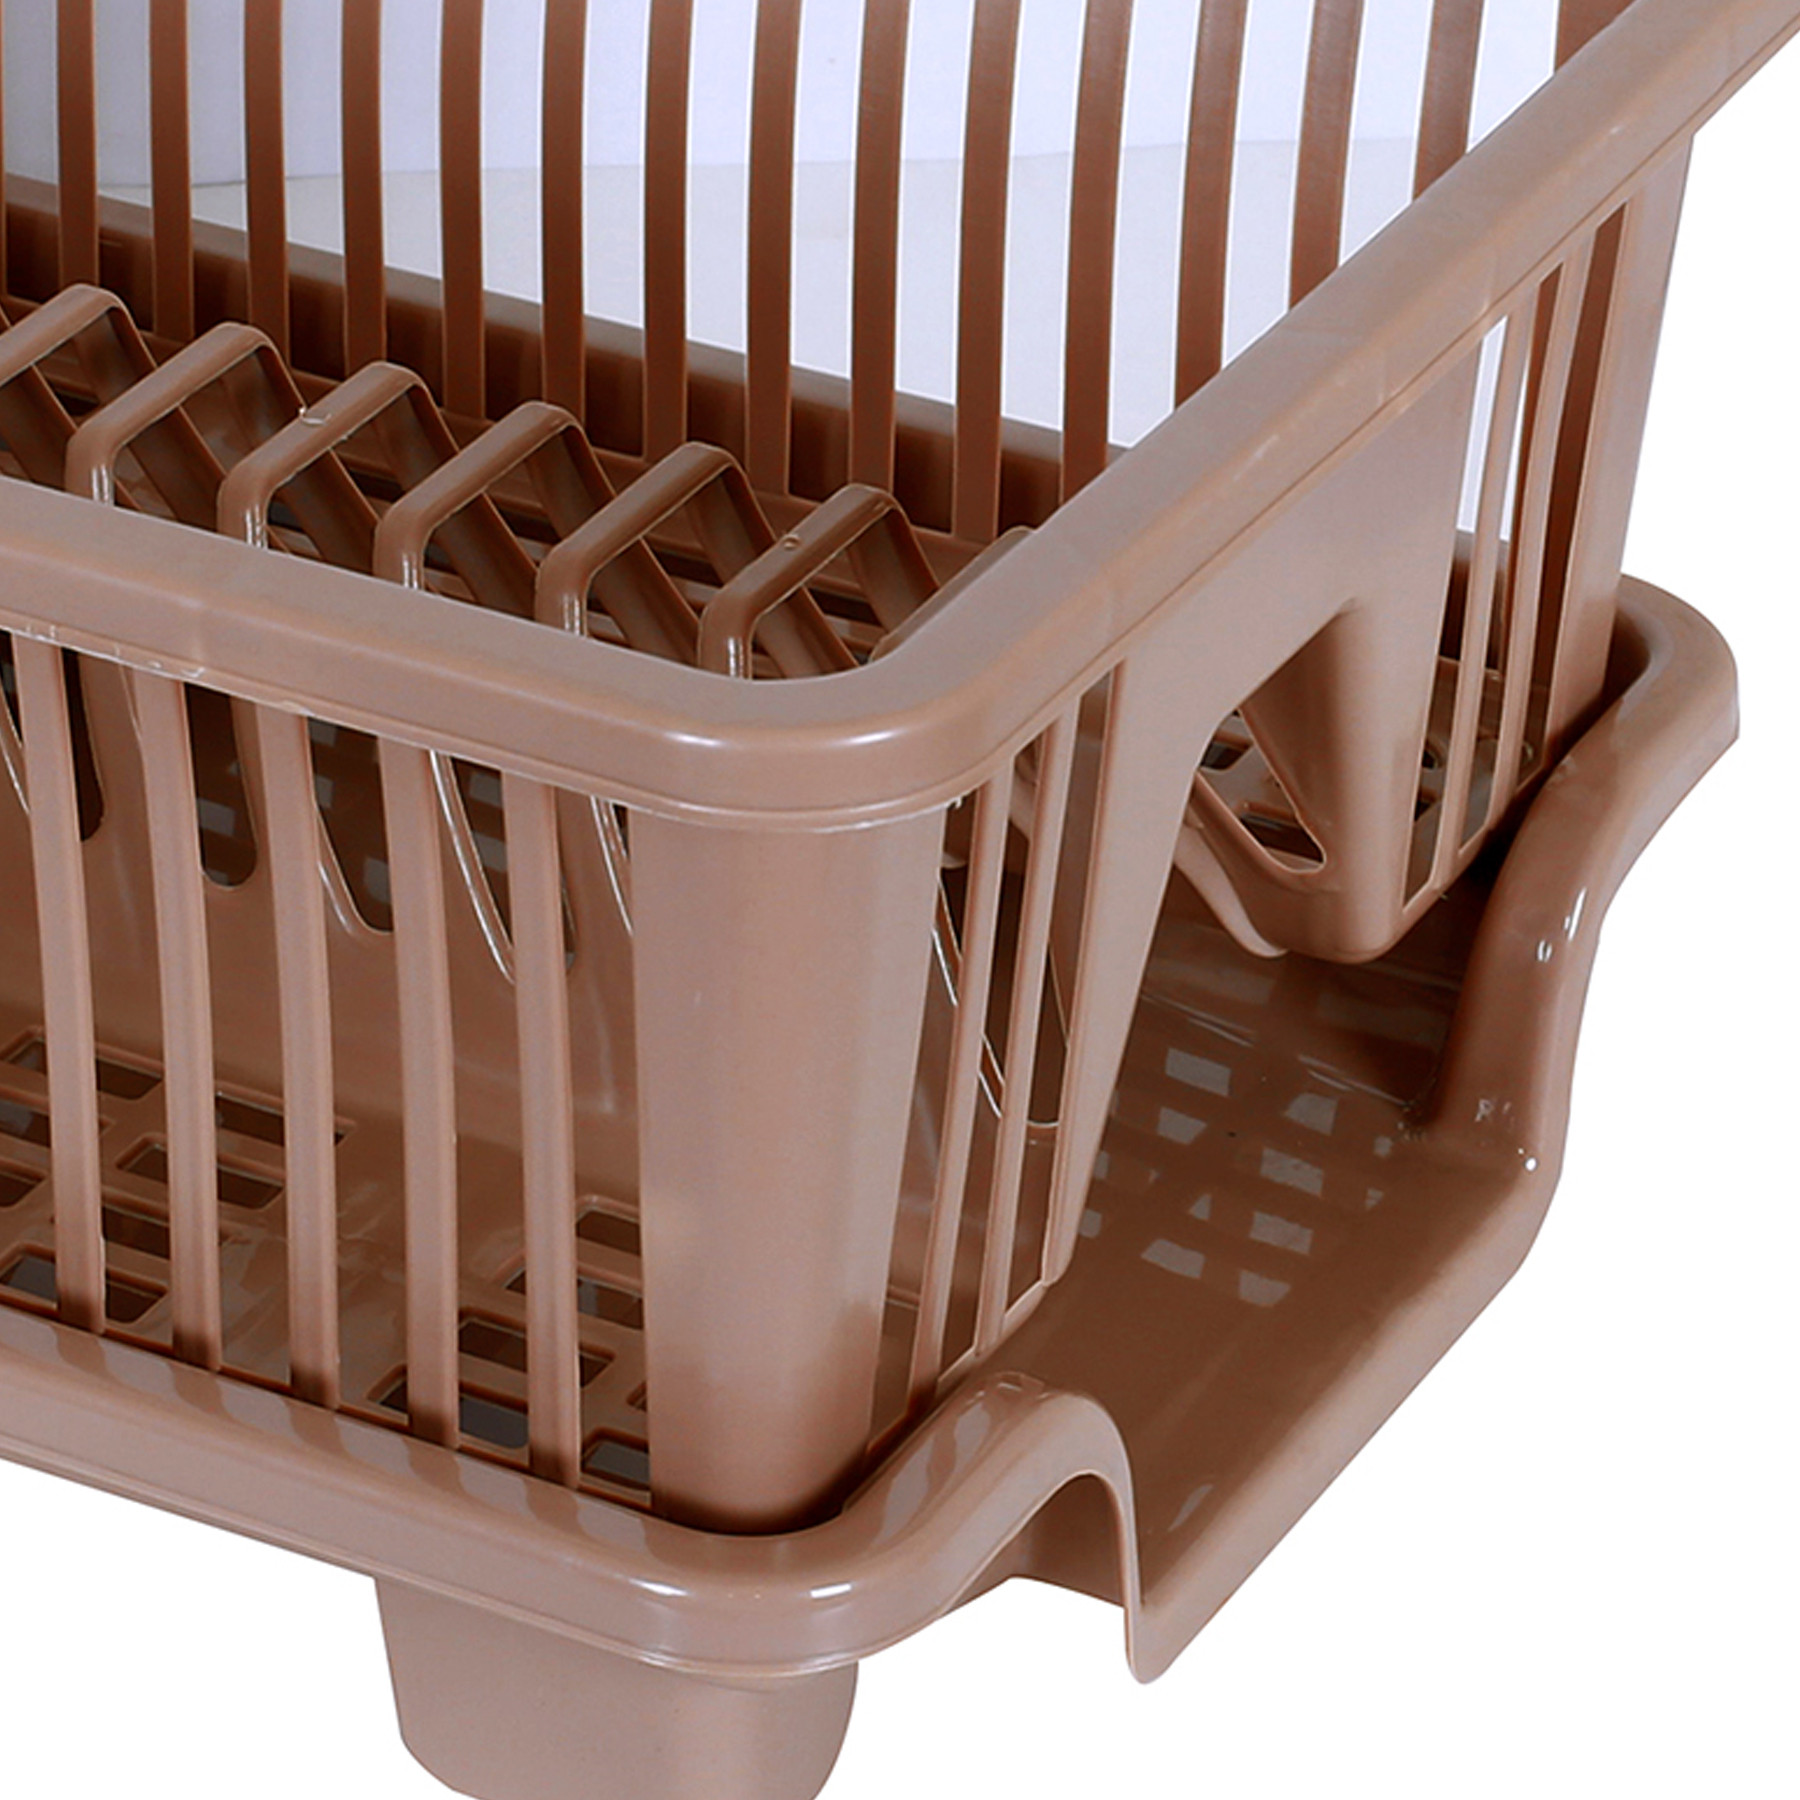 Kuber Industries Dish Drainer | Plastic Cutlery Holder | Drying Basket with Tray | Dish Drying Rack for Kitchen Utensils | Bartan Stand for Kitchen | Drying Tray | Maple Brown